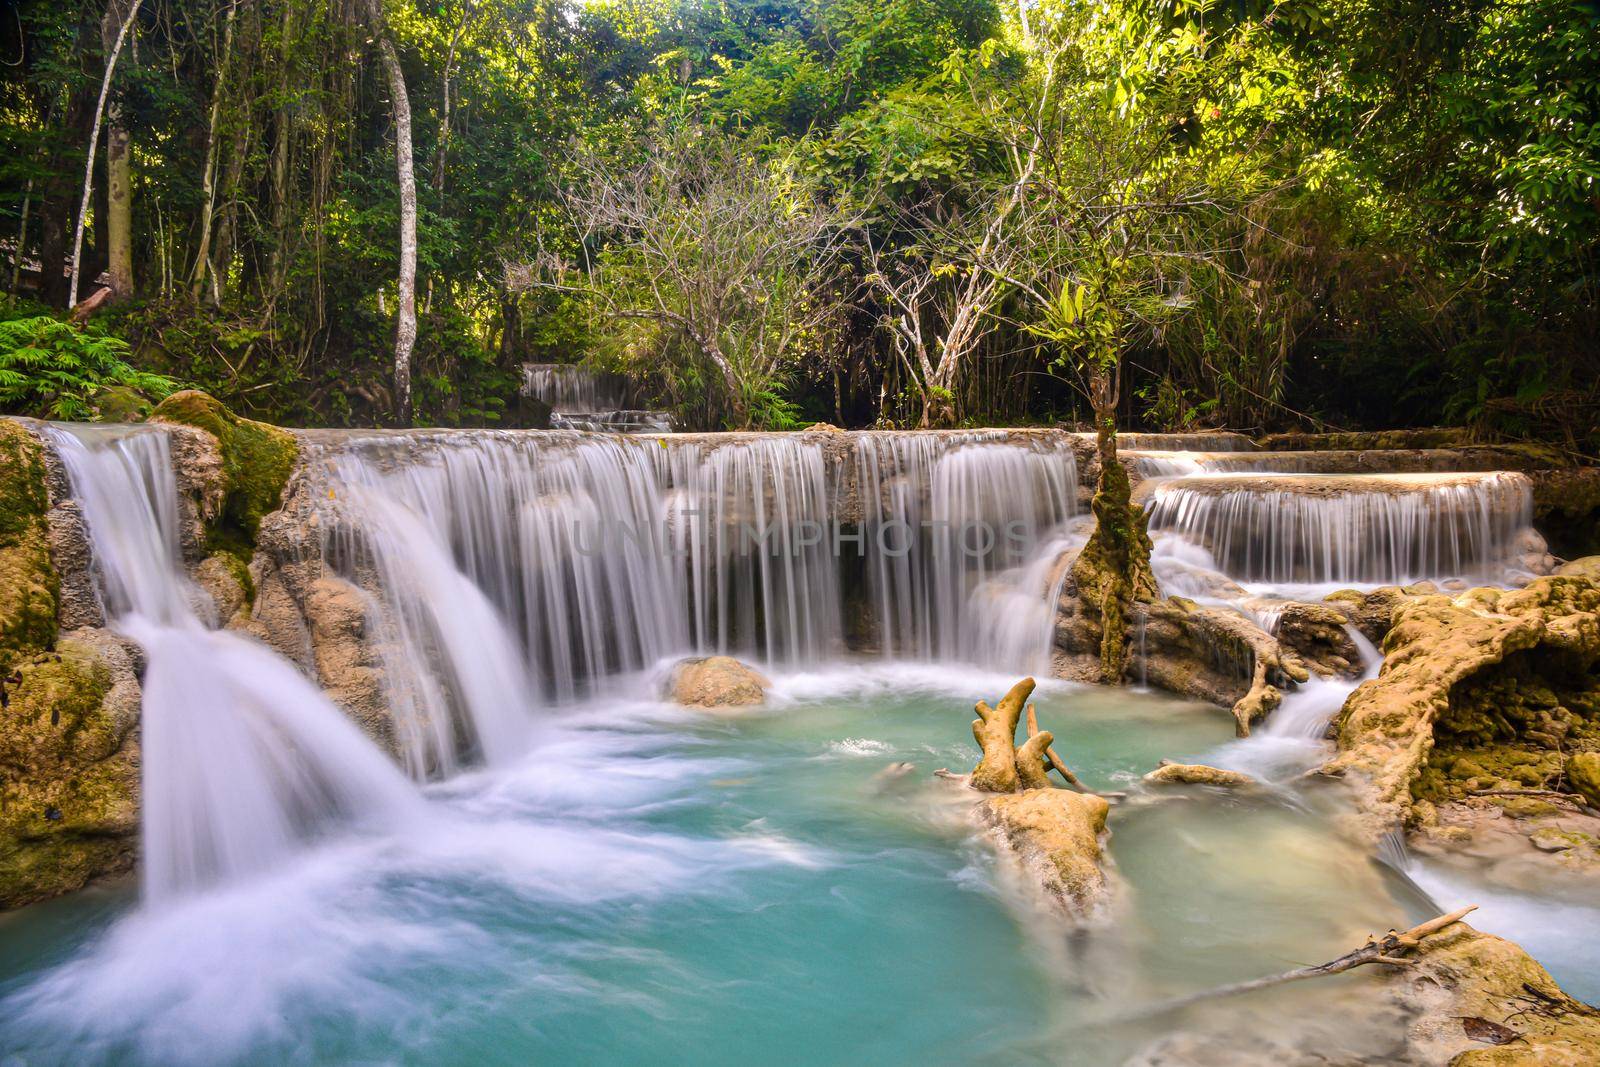 Tat Kuang Si or Kuangsi Waterfall in Luang Prabang, Laos, one of the most-visited tourist attractions in Laos